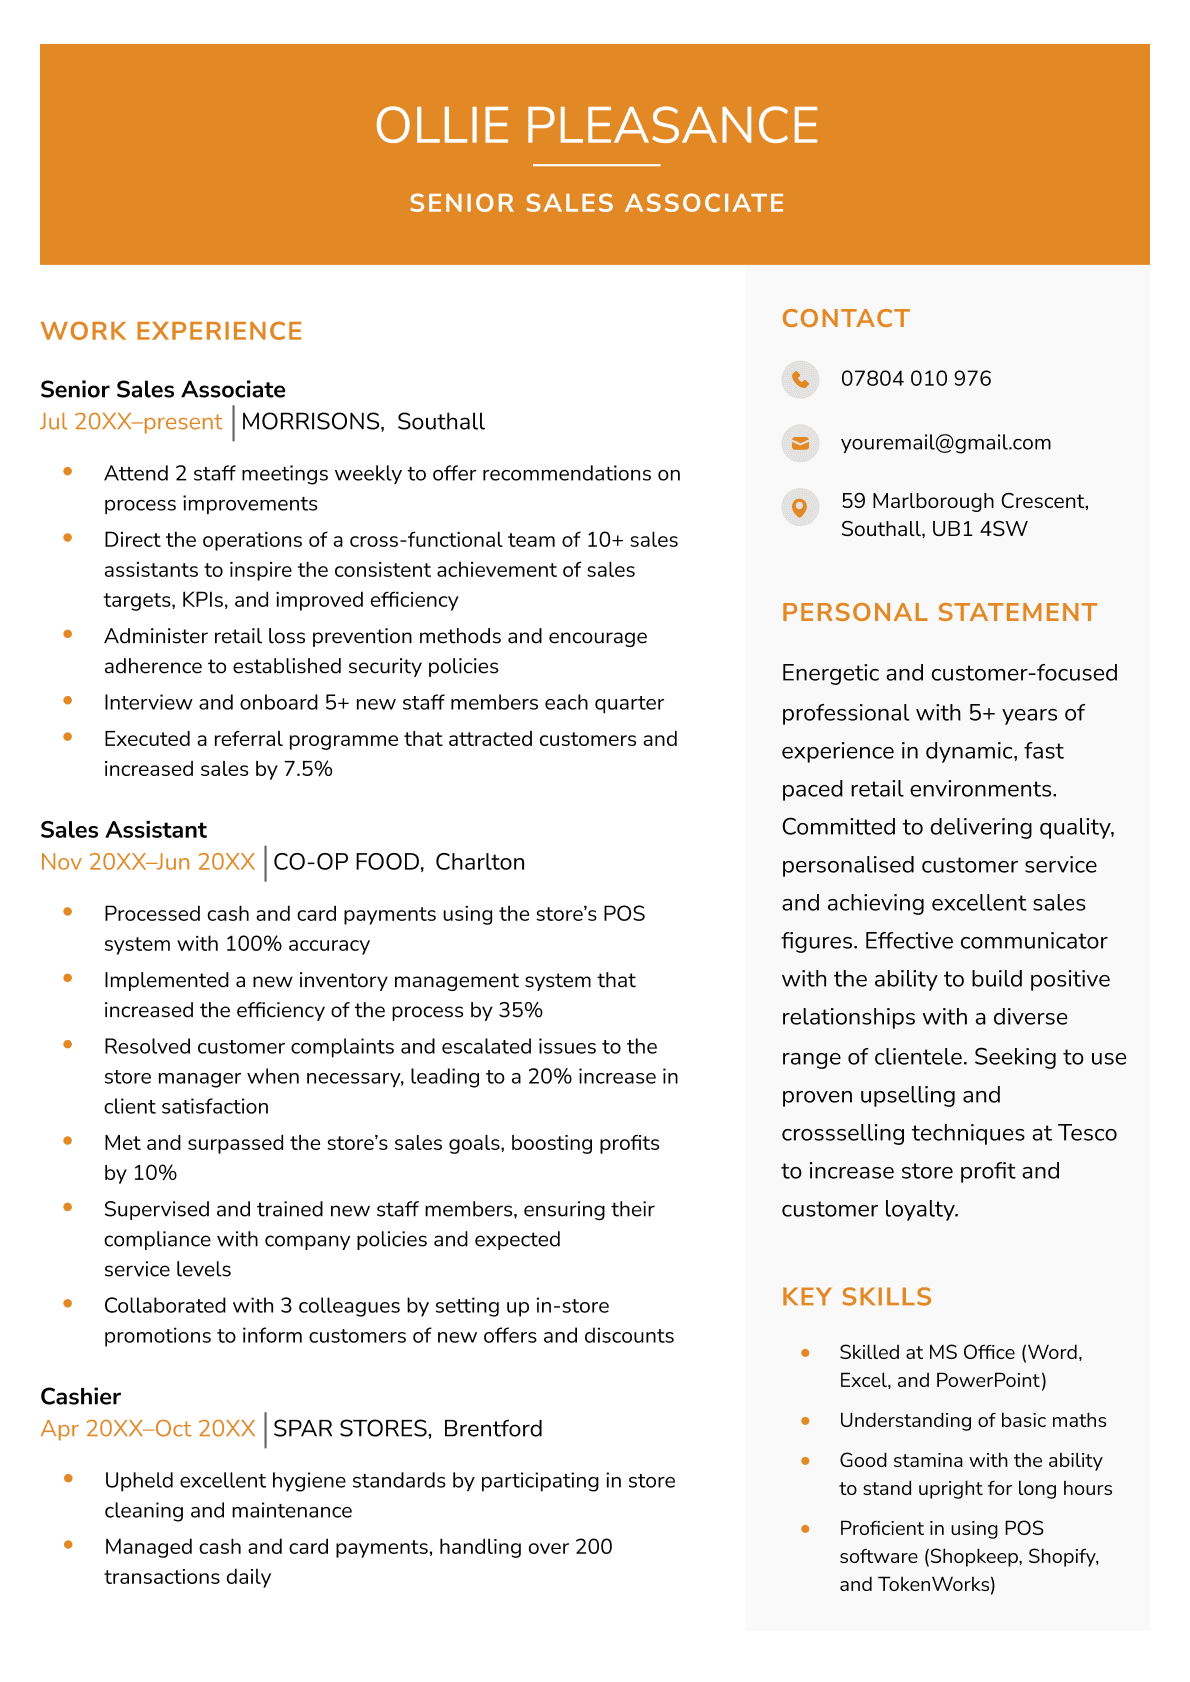 Page one of the orange Exeter CV template highlights the candidate's CV introduction, work history, and skills, while its header provides the applicant's name and job title in a bold fashion.